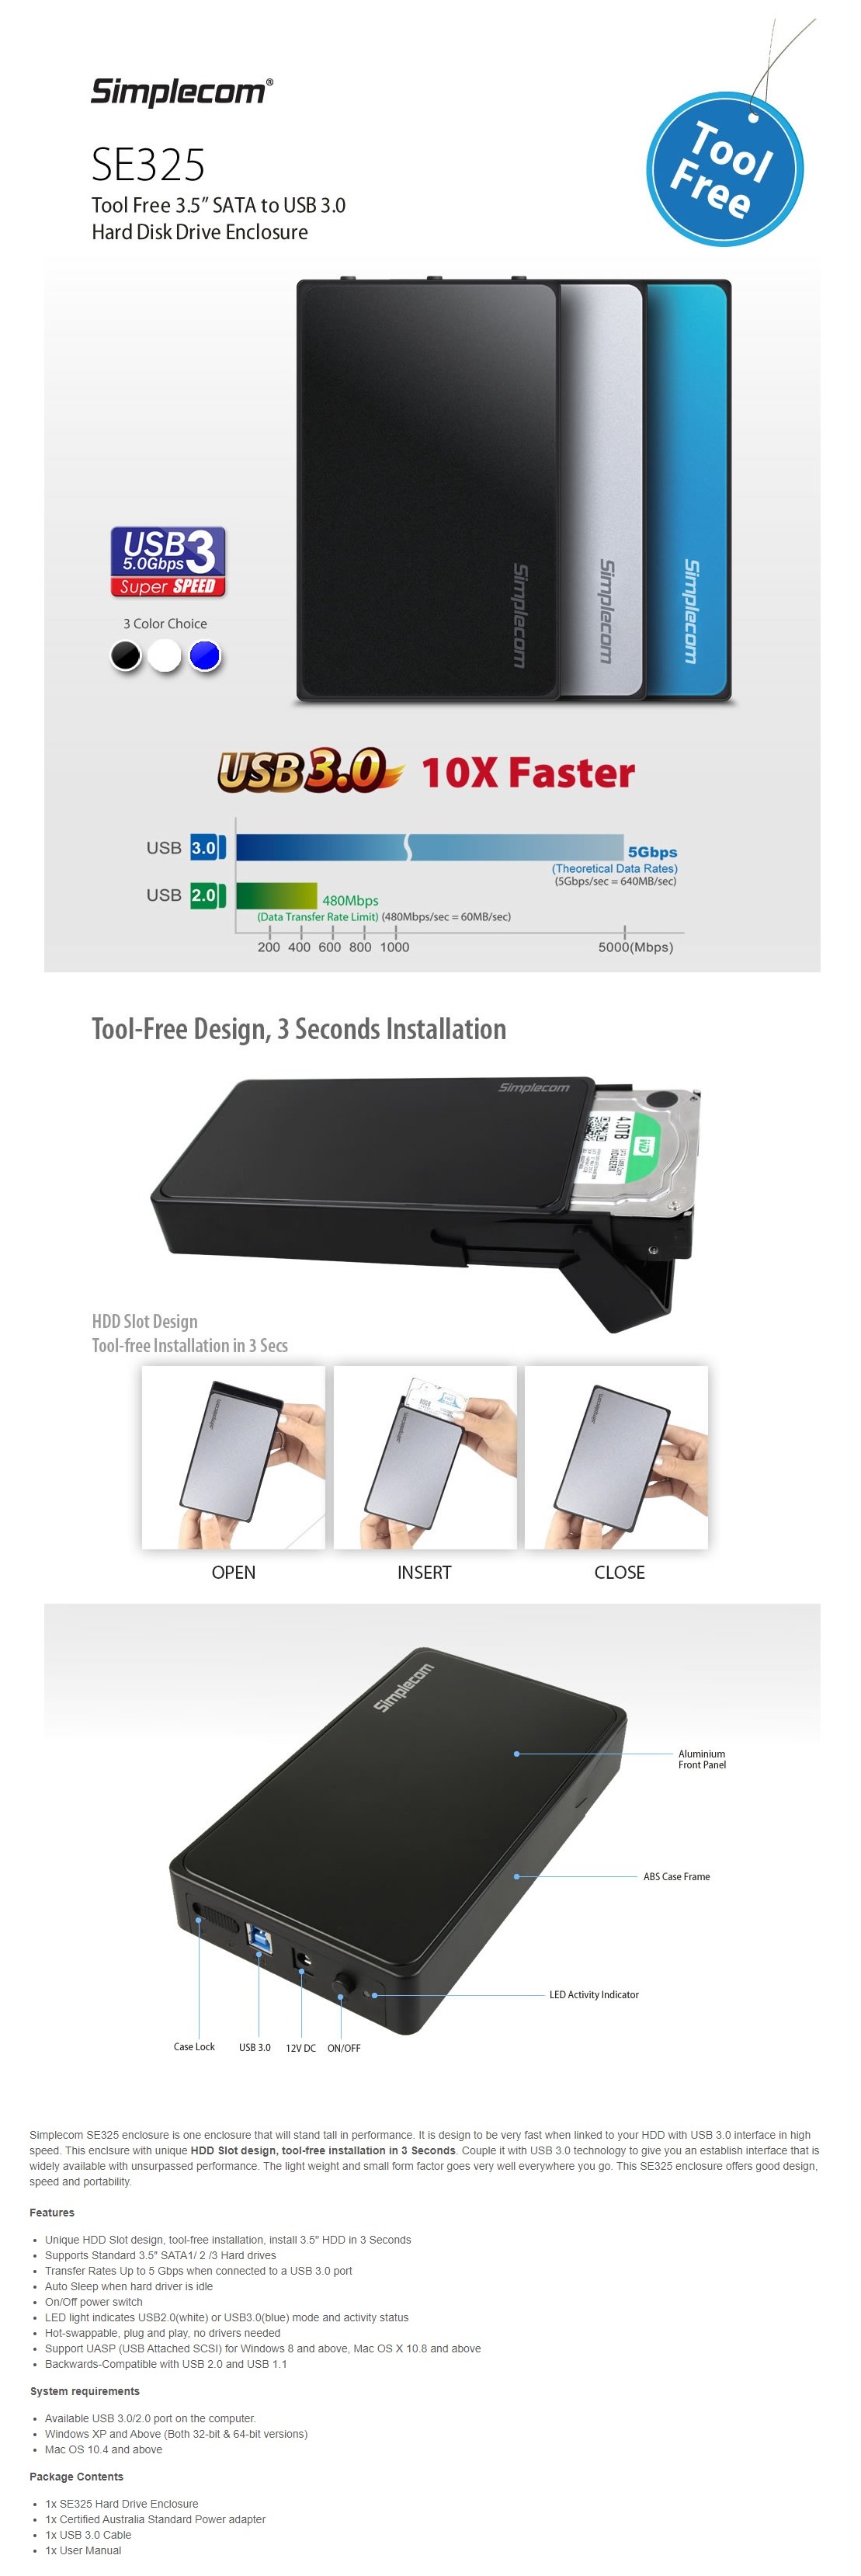 A large marketing image providing additional information about the product Simplecom SE325 3.5" SATA HDD to USB 3.0 Hard Drive Enclosure - Silver - Additional alt info not provided